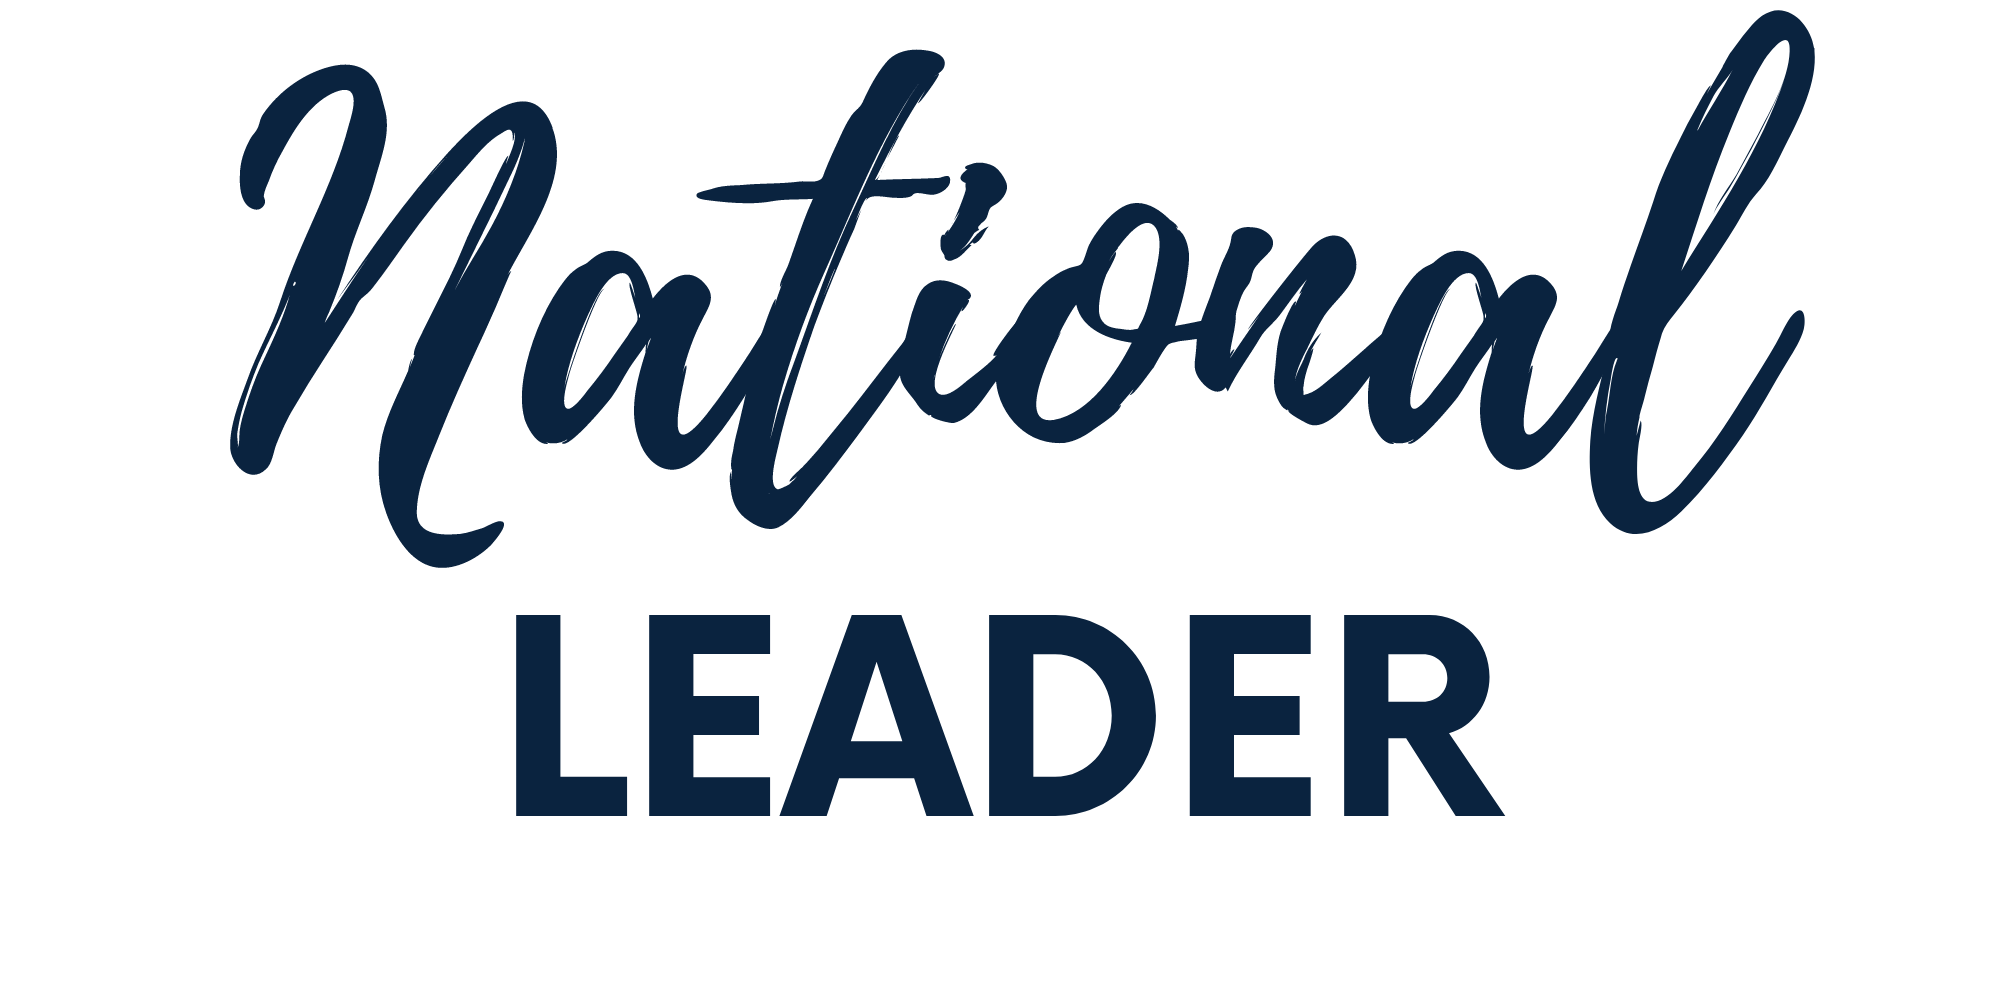 National Leader text